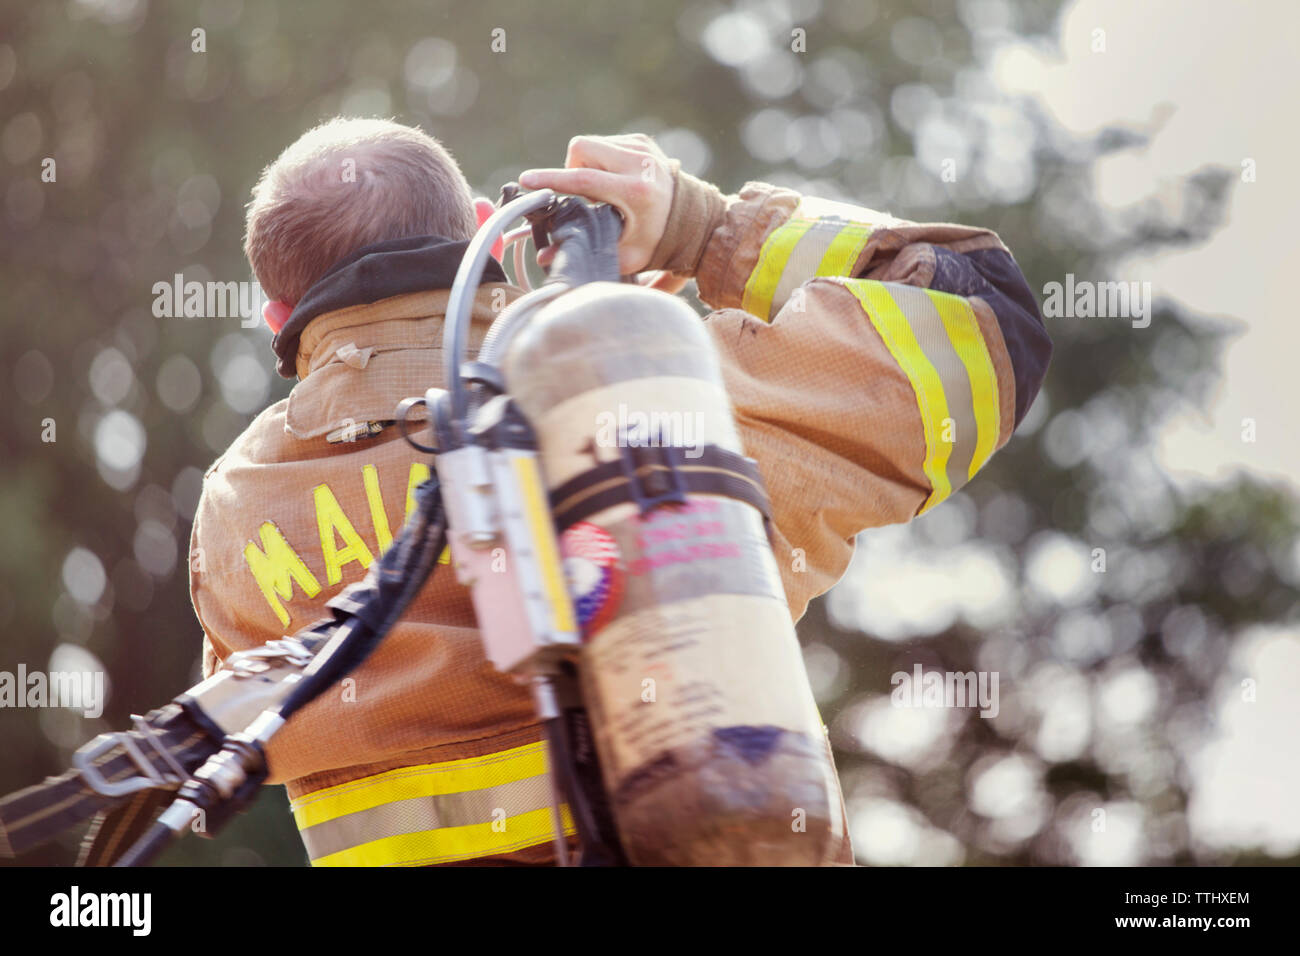 Rear view of man carrying fire extinguisher Stock Photo